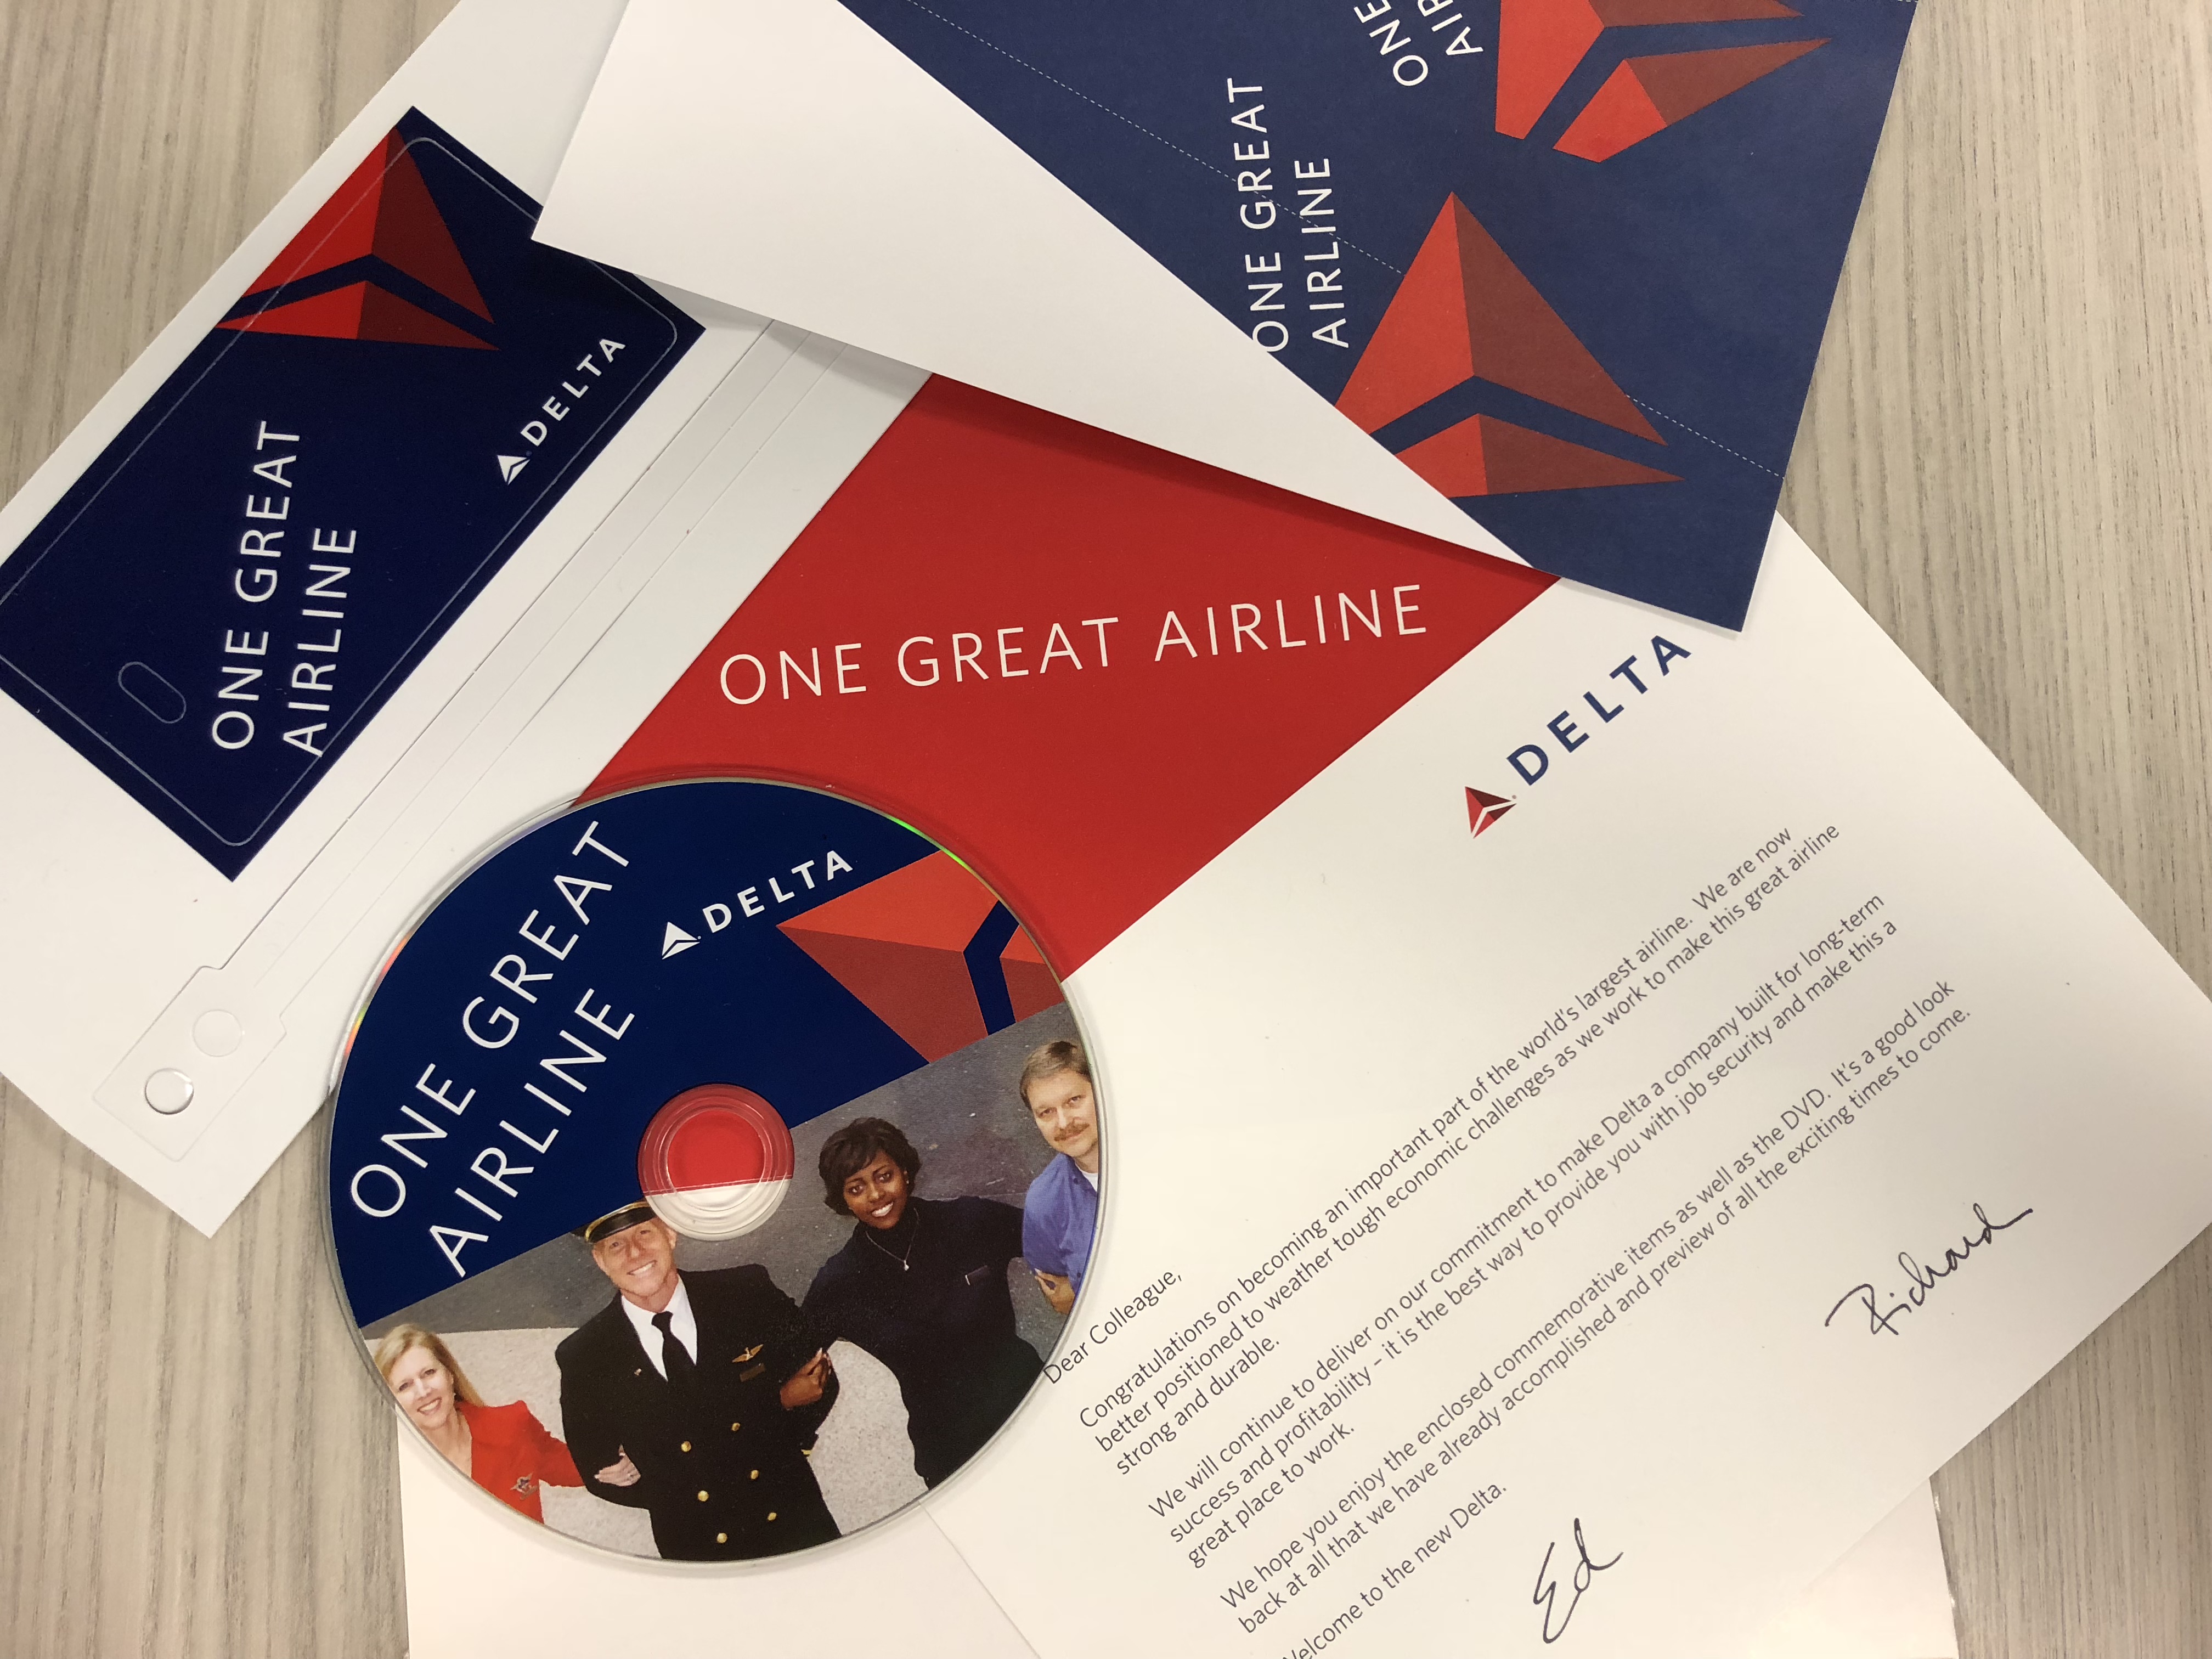 Delta welcome packet - One Great Airline | Delta News Hub